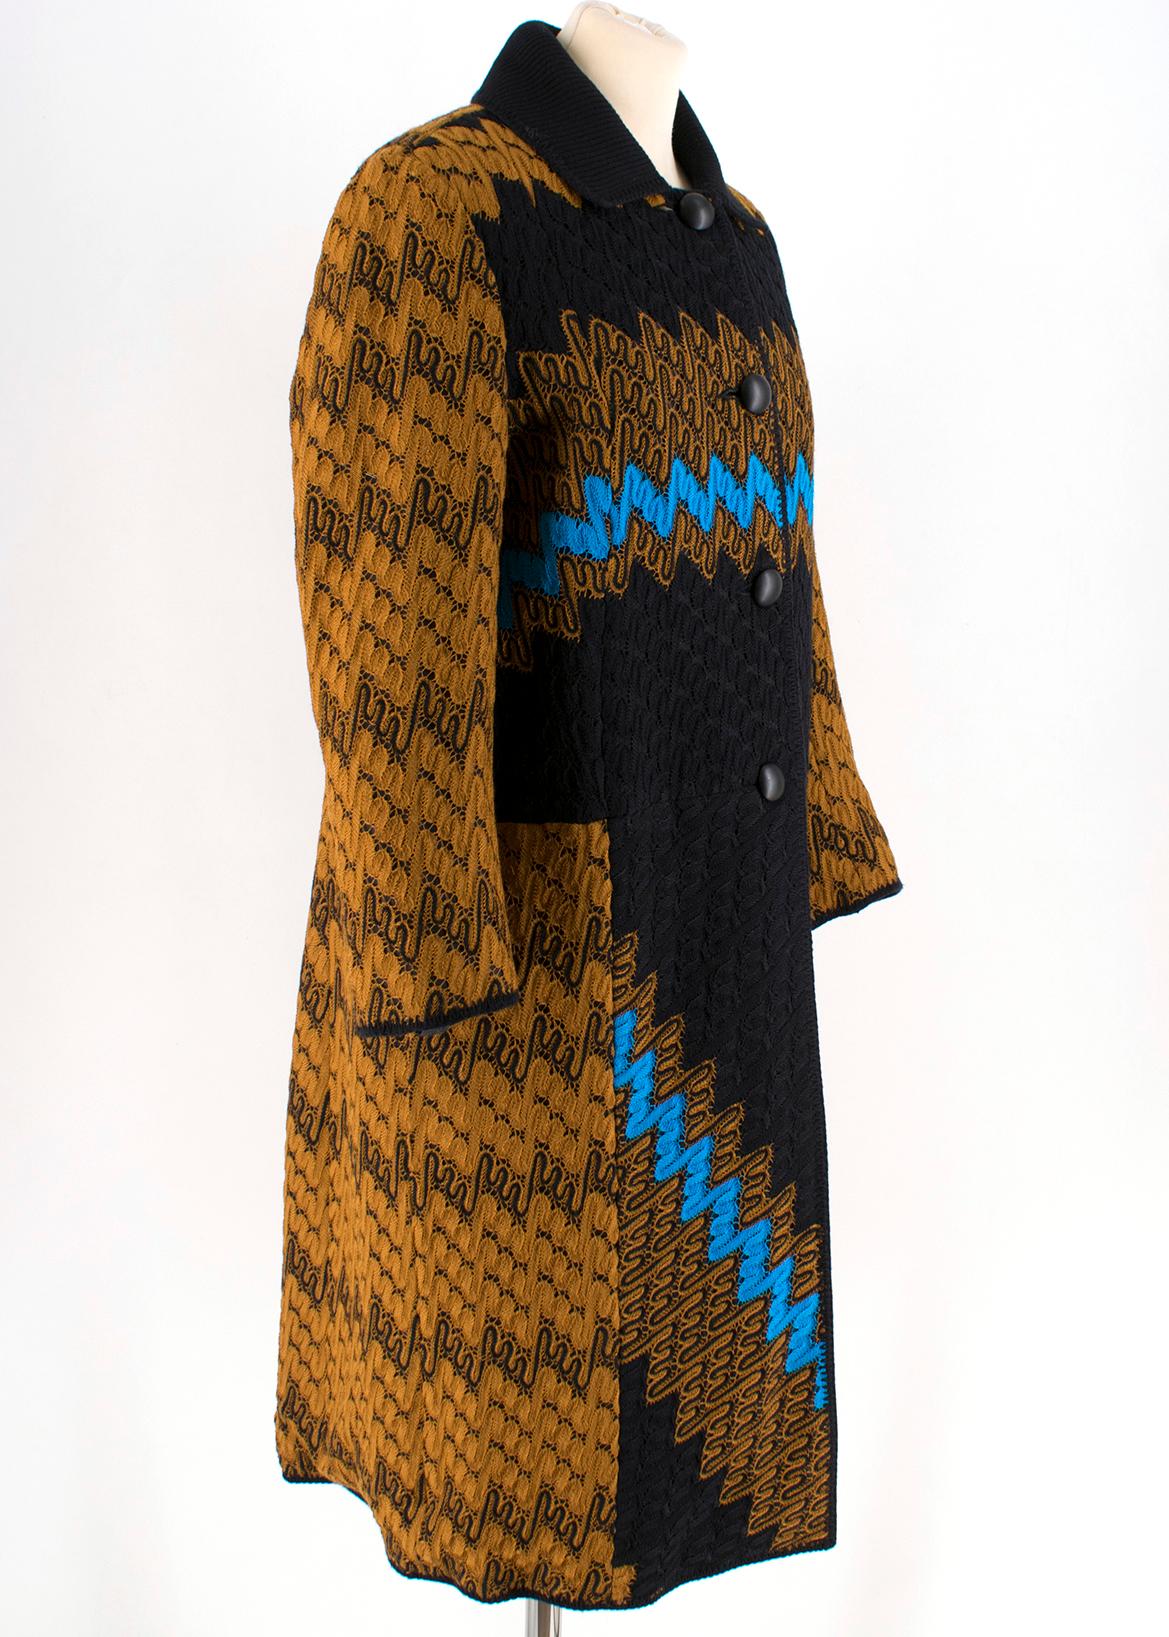 Missoni Reversible Zigzag Crochet Knit & Satin Shell Coat 

-Gold, blue, and black coloured 
-Wool knit blend 
-Black stitching trim
-Four-button front closure 
-Ribbed collar
-Two functional side pockets
-Silk-blend lining 
- Satin Shell reversible